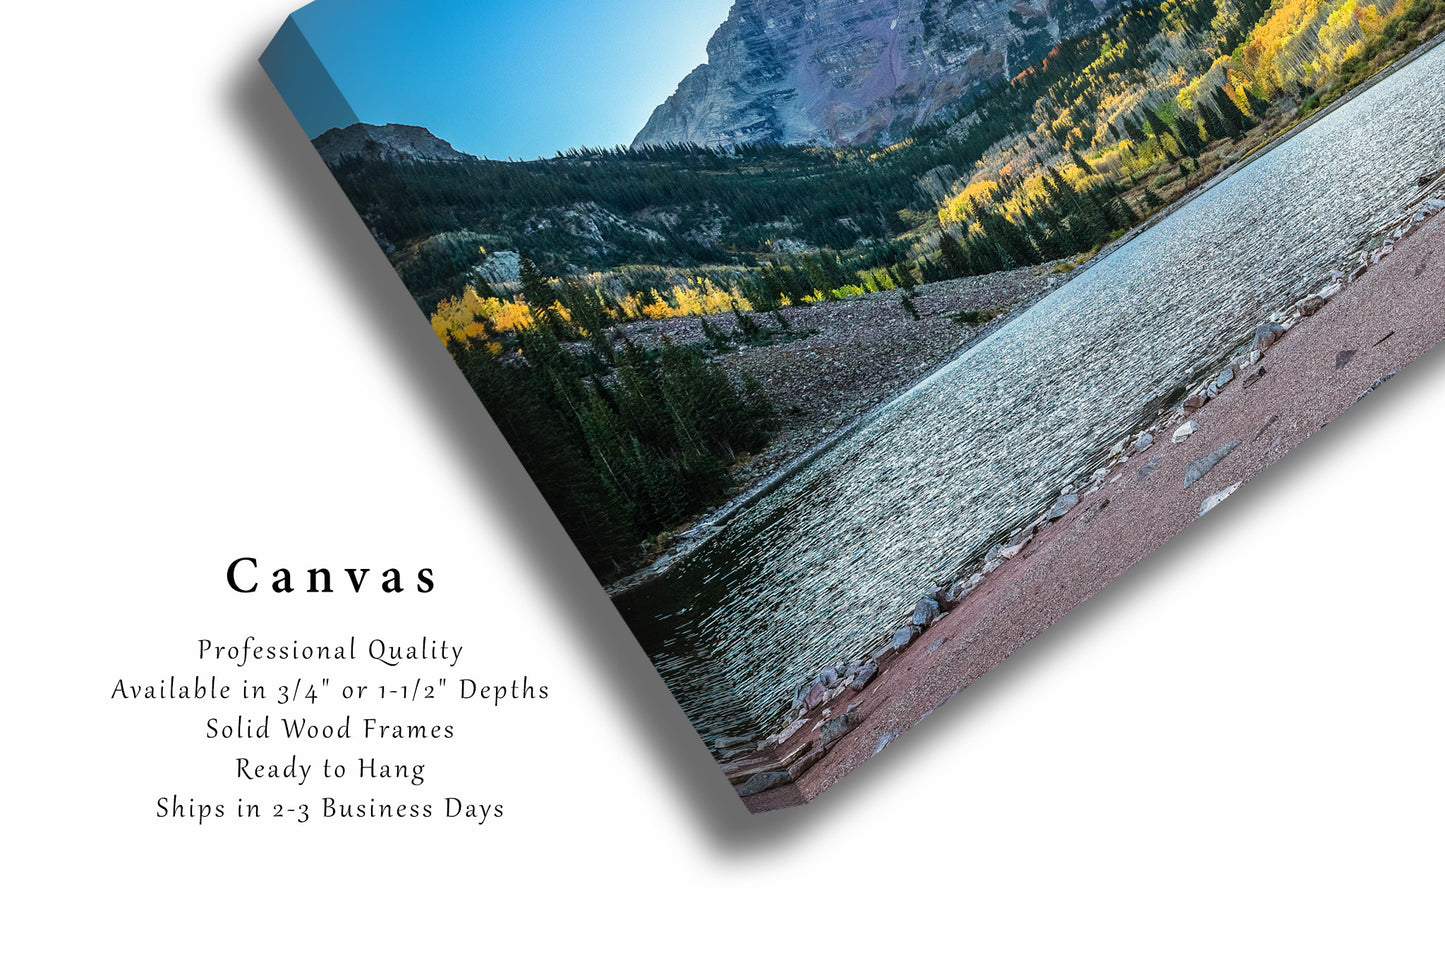 Canvas Wall Art | Maroon Bells Photo | Rocky Mountains Gallery Wrap | Aspen Colorado Photography | Landscape Picture | Western Decor